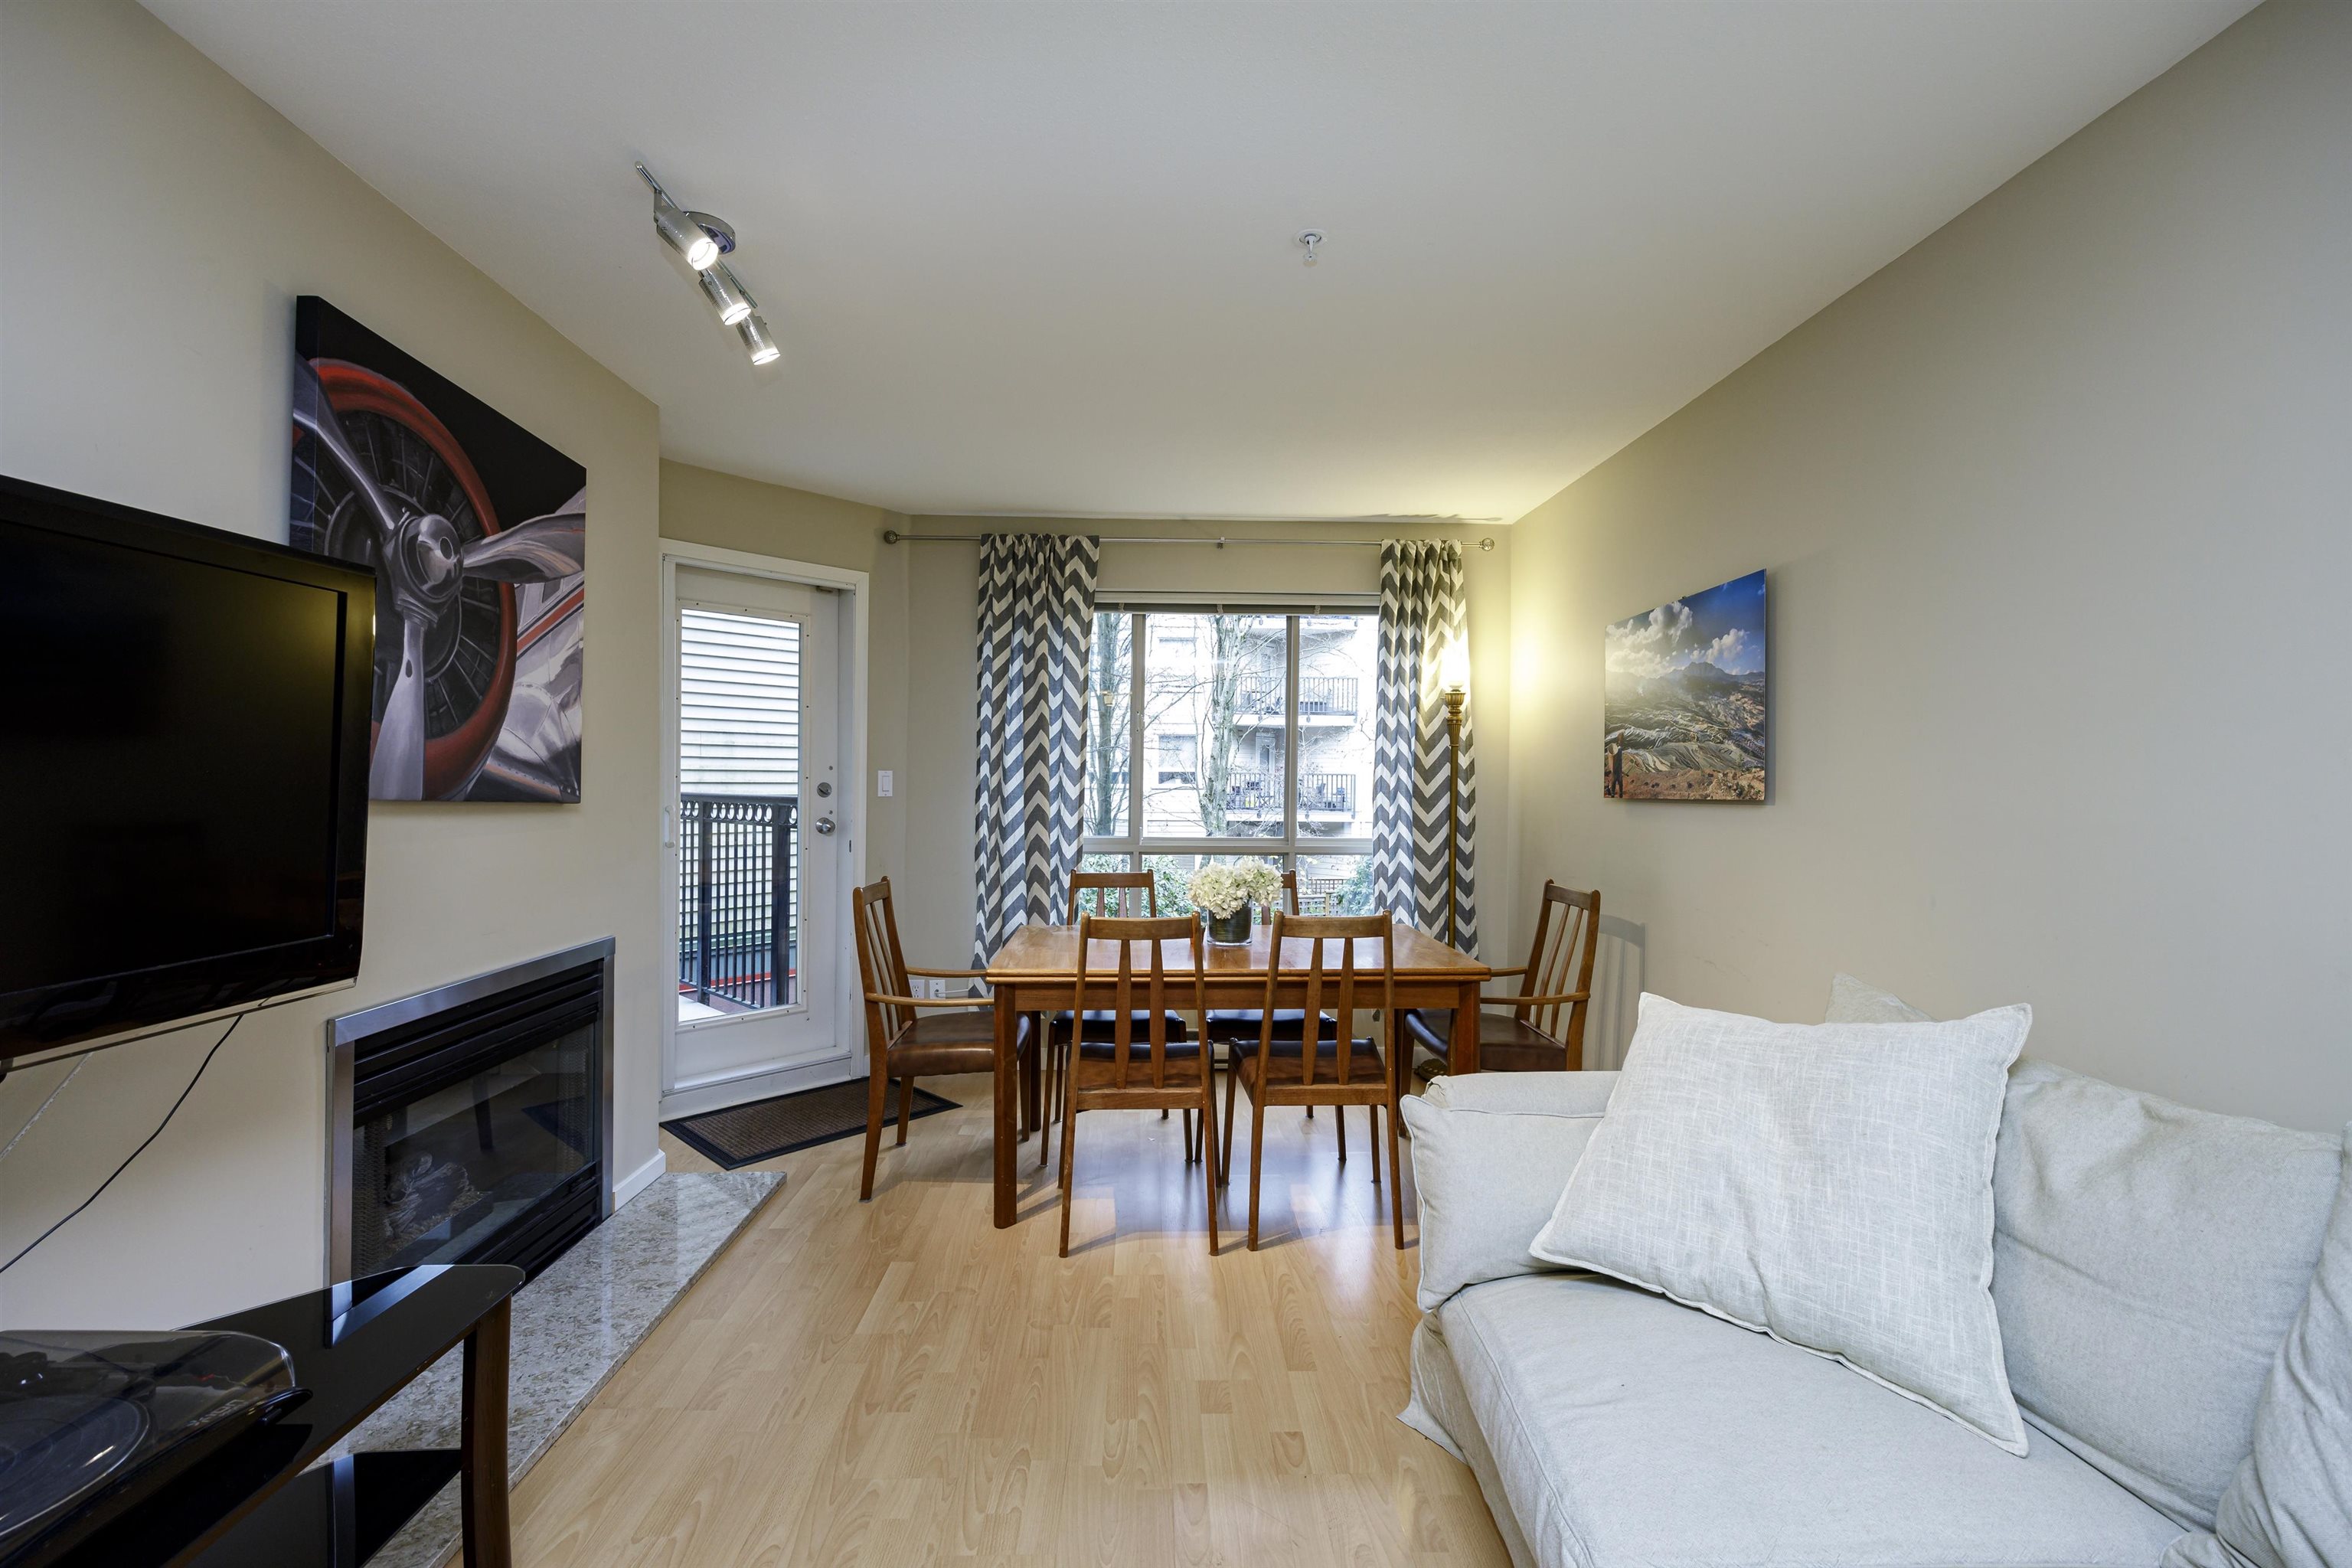 Listing image of 201 150 W 22ND STREET